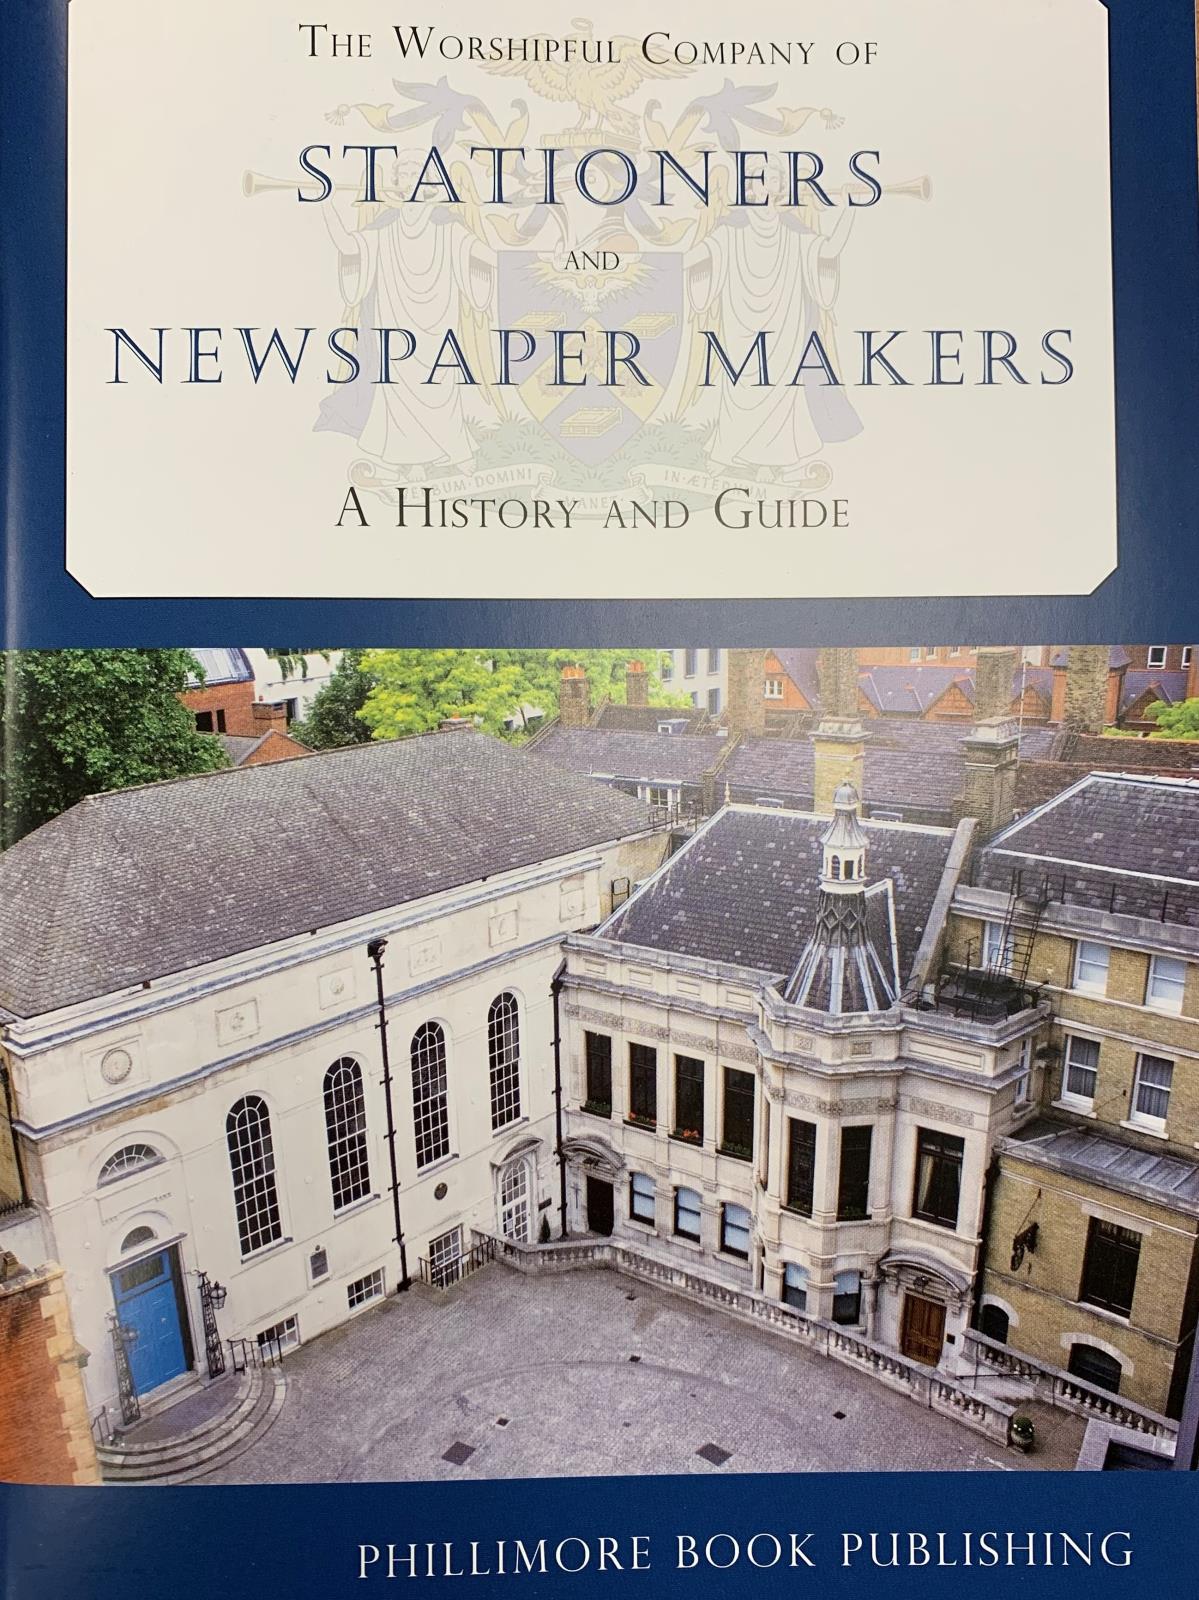 The Stationers’ Company A History and Guide by N H Osborne